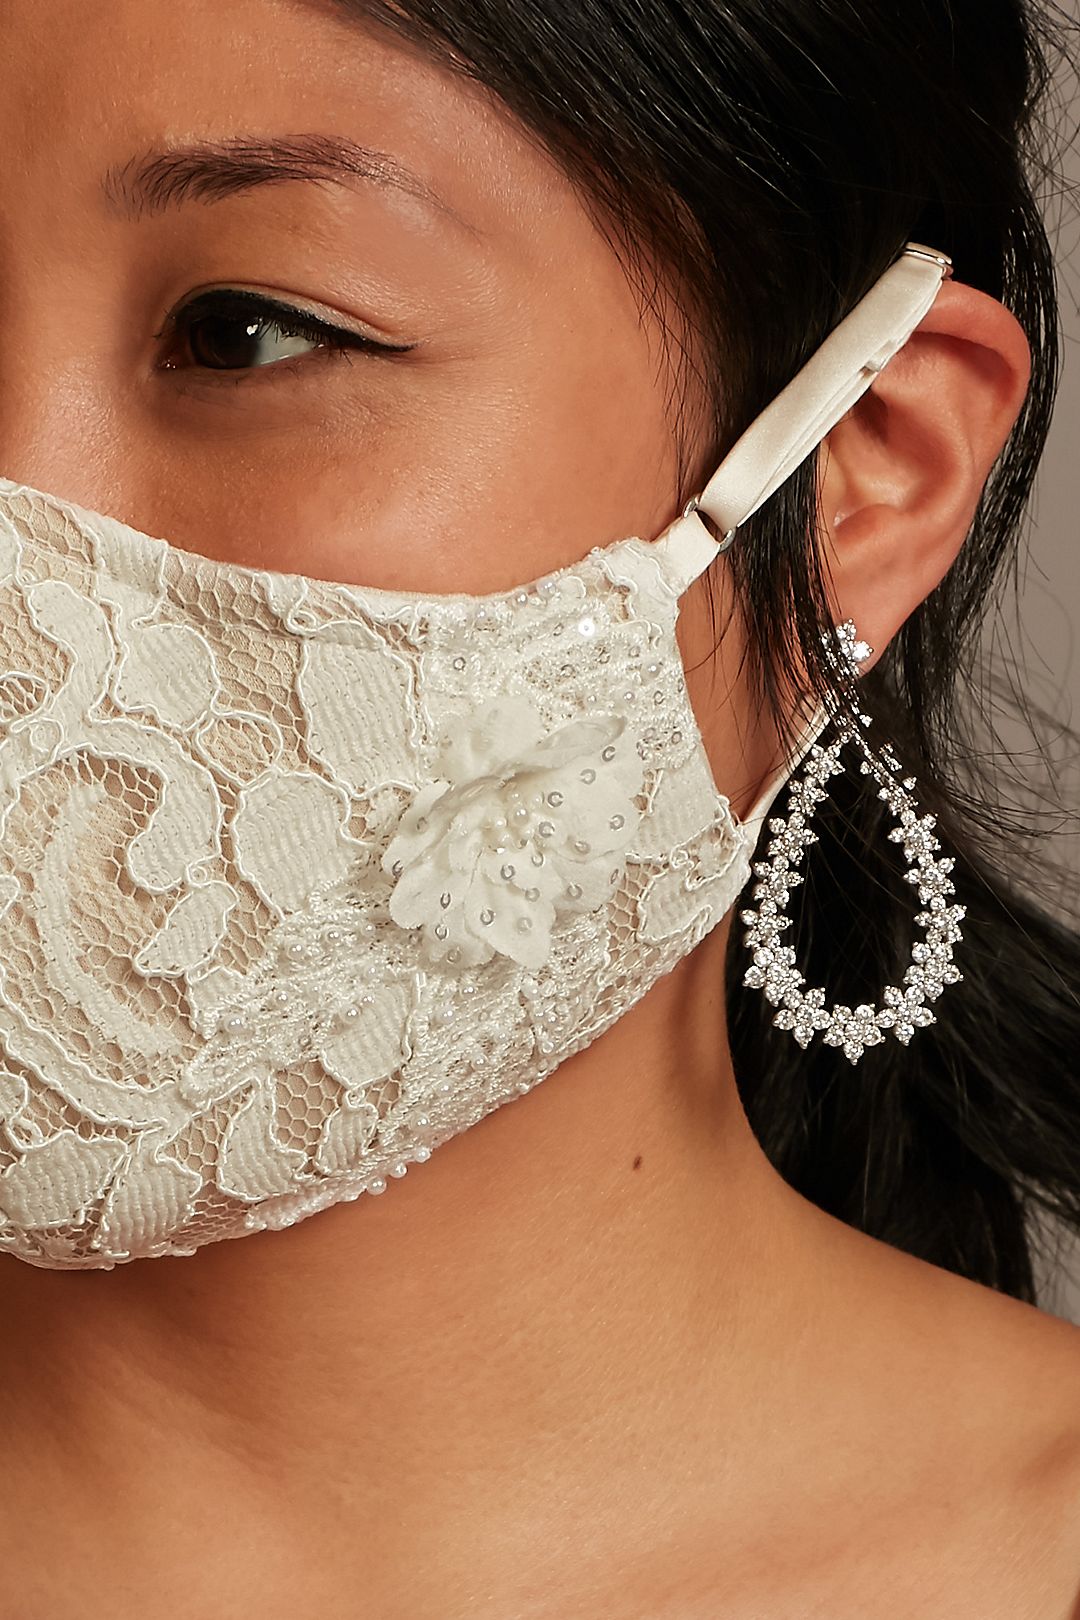 3D Floral Appliques Embroidered Fashion Face Mask Image 2